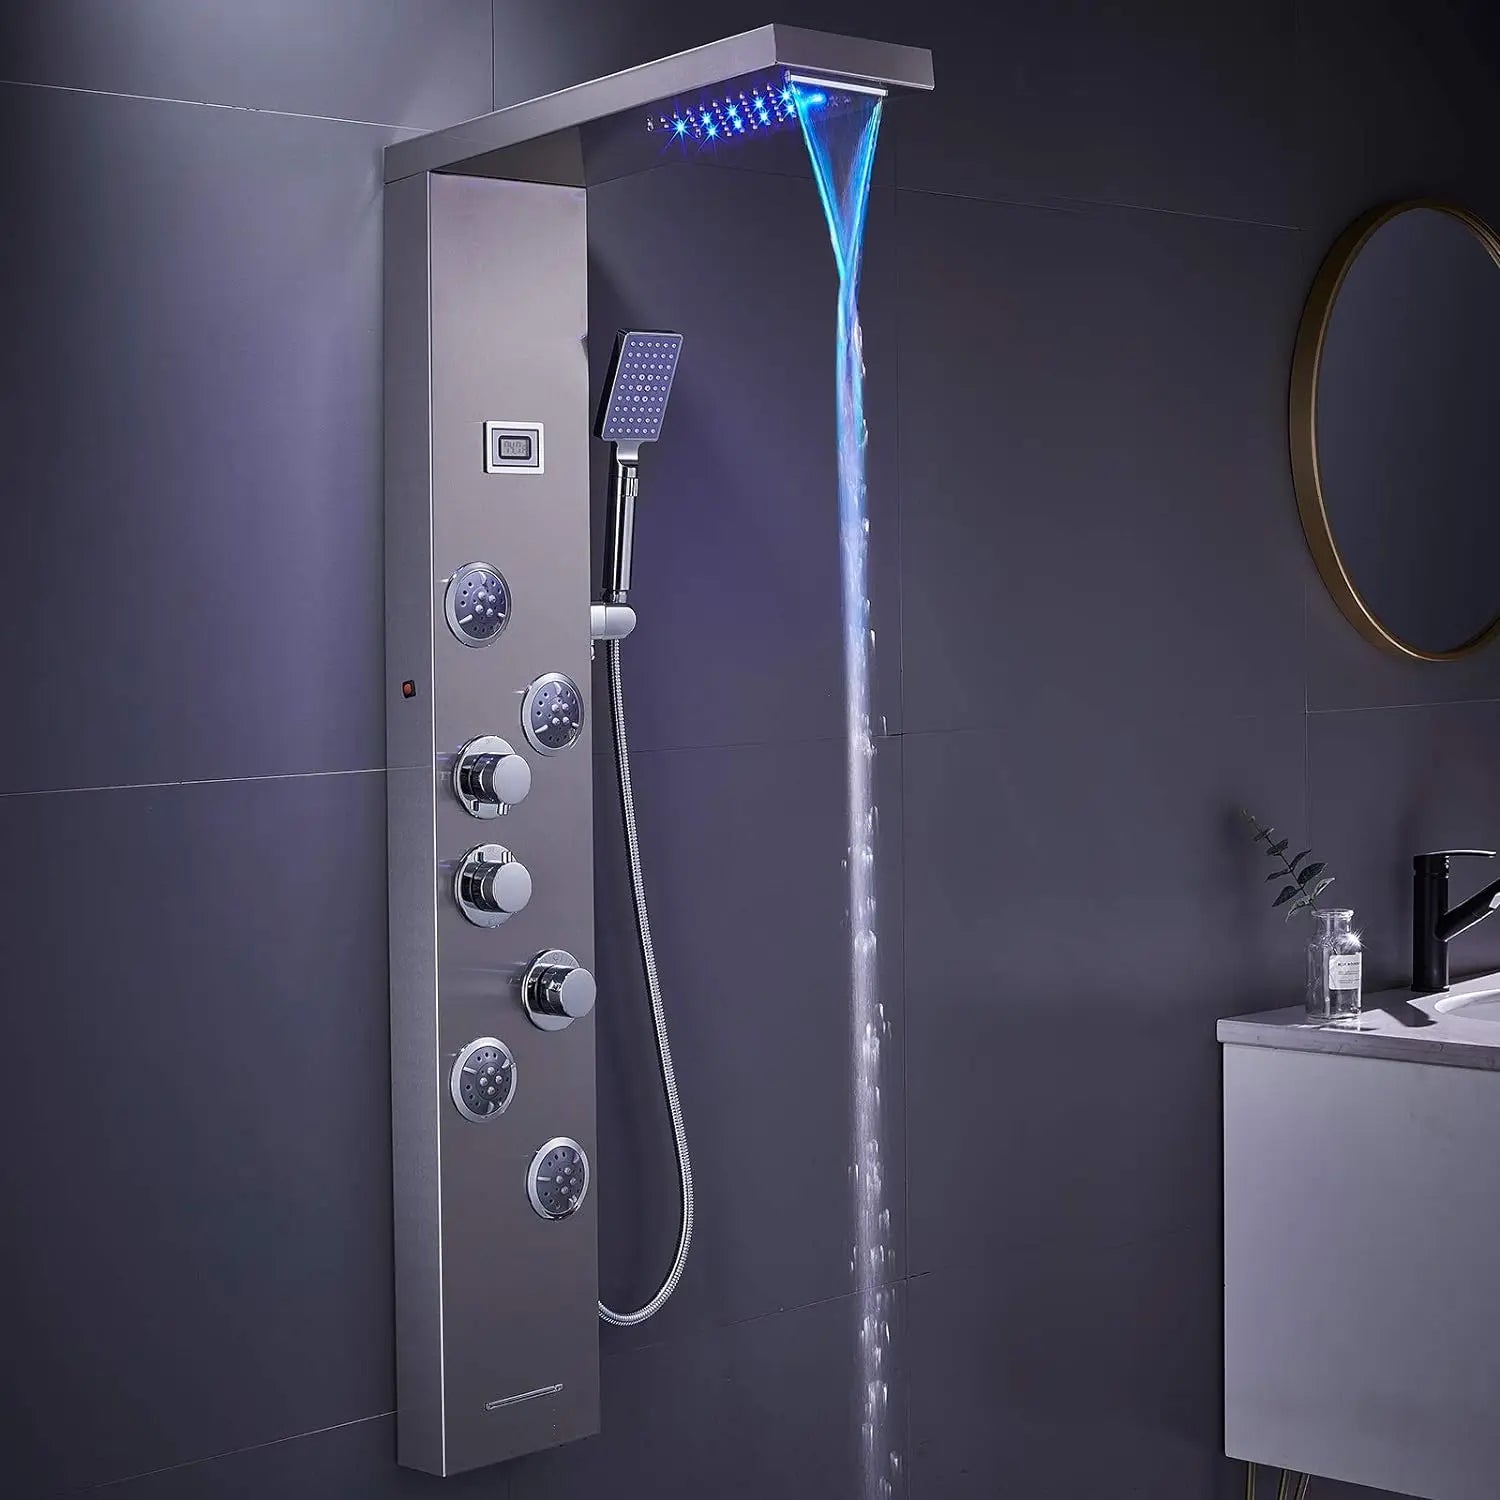 Shower Panel Tower System, 6 in 1 Stainless Steel LED Shower Column, Rainfall & Waterfall Head, Massage Jets Spa Myst